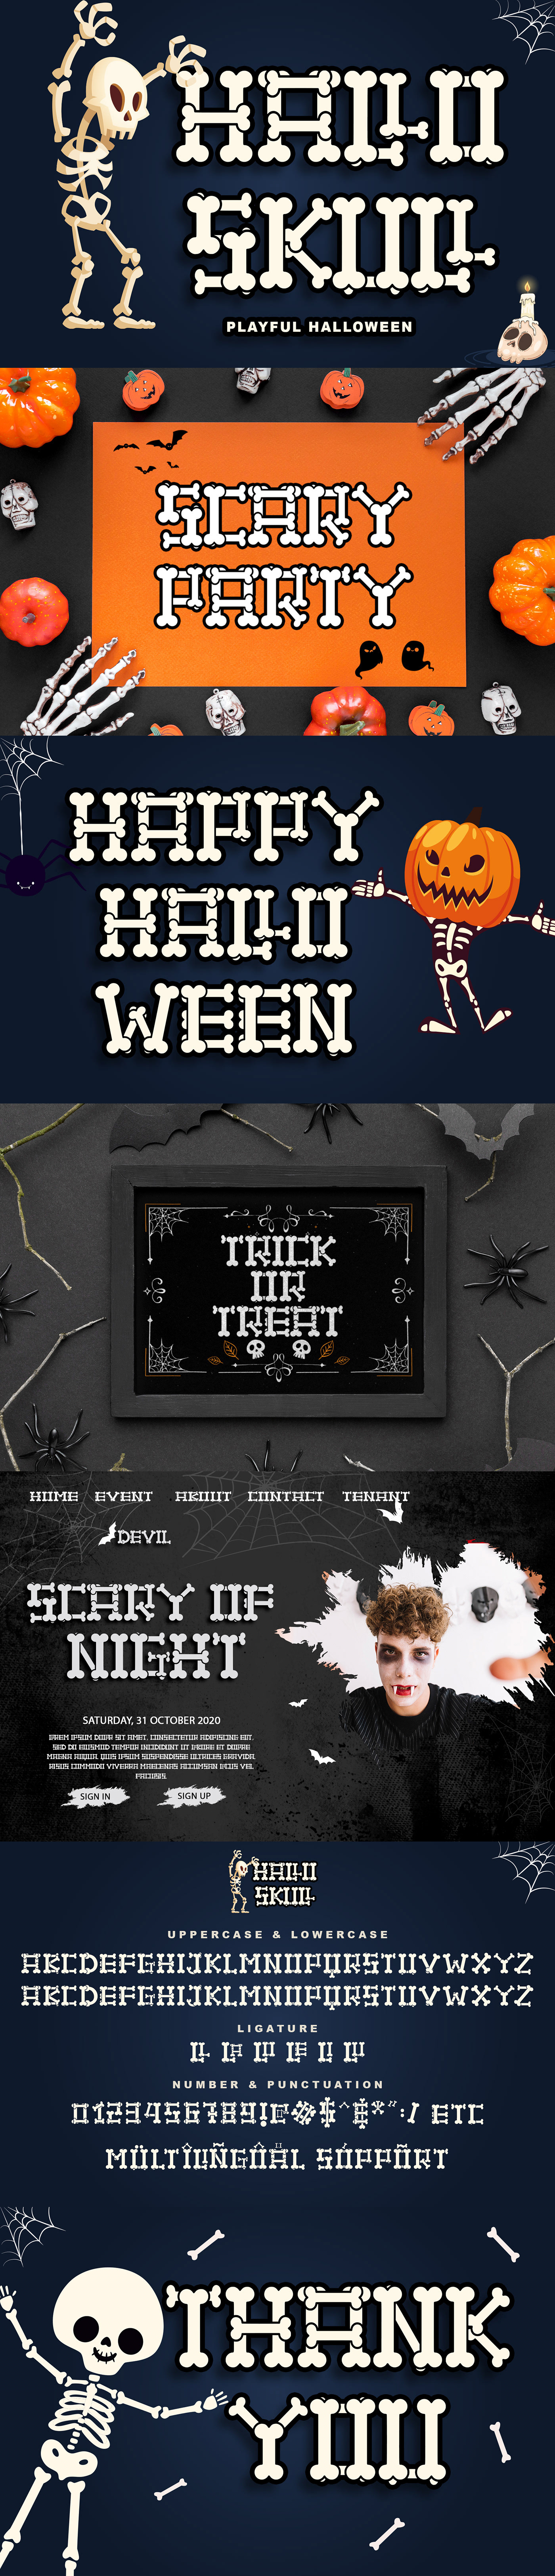 It is a fun, friendly and spooky font which will help you add your creative halloween-themed ideas.